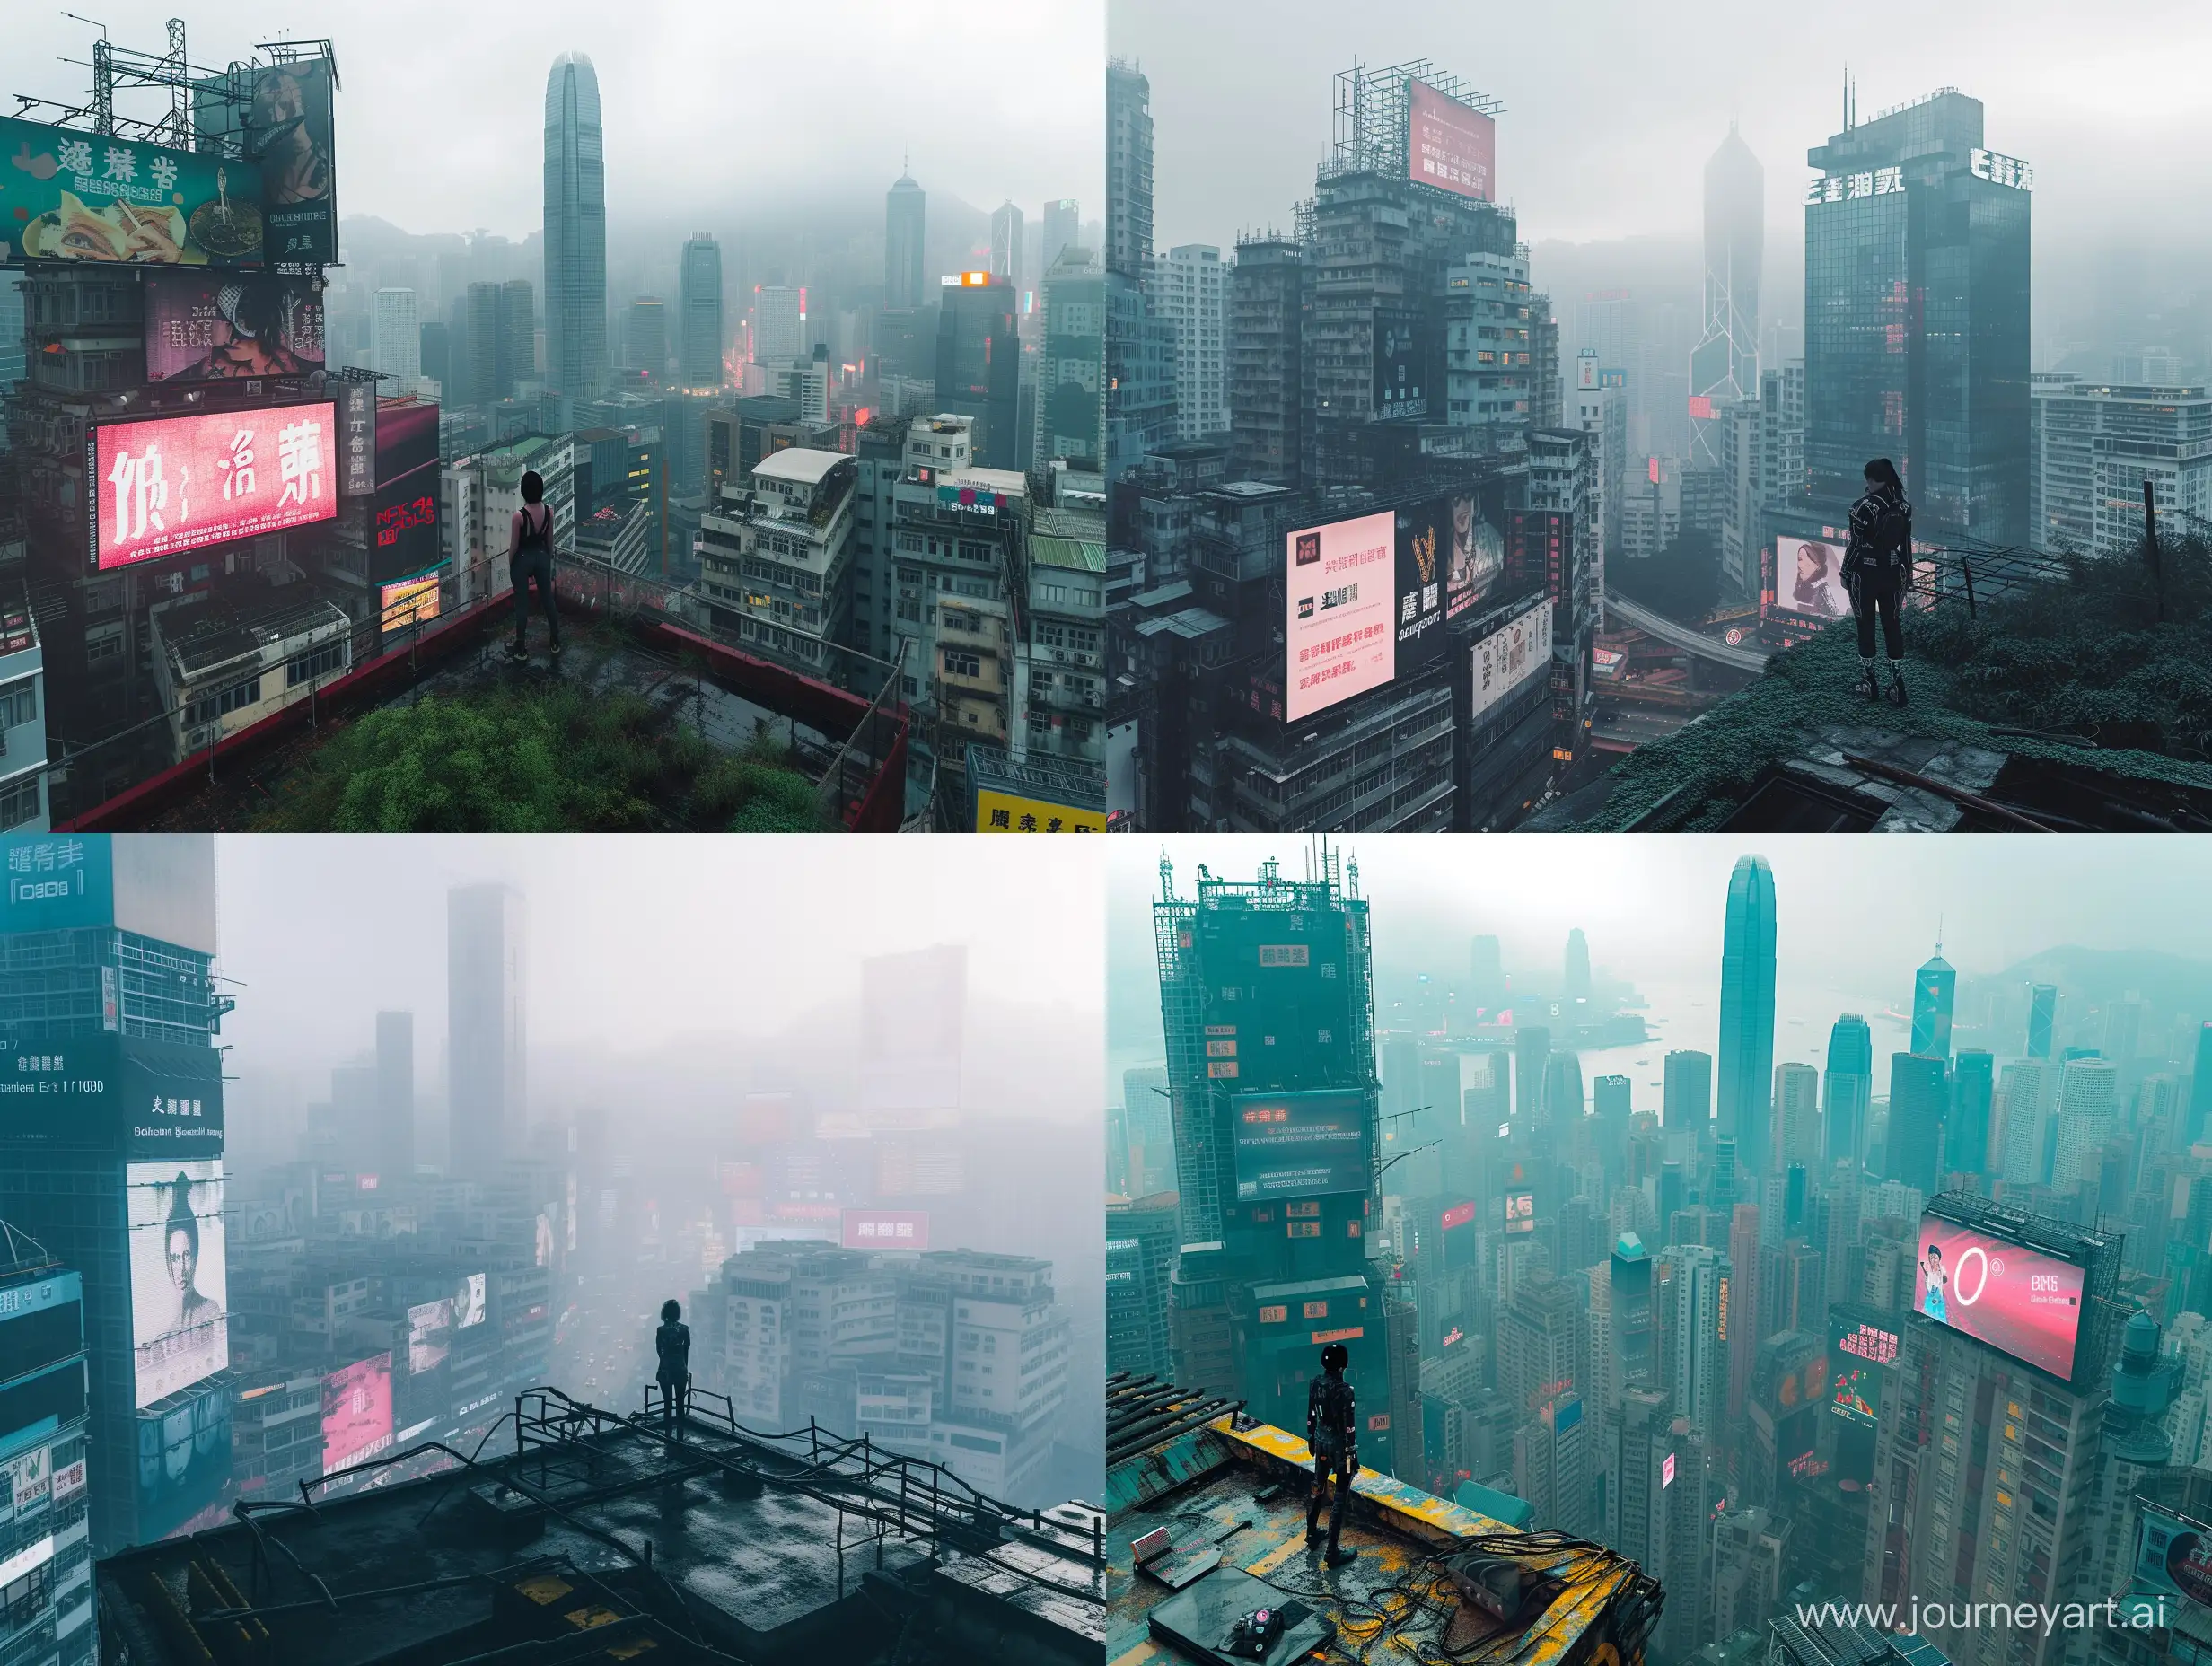 a bustling large Procedural hong kong cityscape, the photo is bathed in natural lighting, relaxing day time setting. Shot in 4k with a high end DSLR camera. such as a Canon EOS R5 with a 50mm f/1. 2 lens, creative architectures, drone view, skyline, vivid, foggy, dystopian, science fiction, skyline, billboards, nature, year 2100 futuristic, a cyberpunk woman standing on the roof looking at the viewer, 
